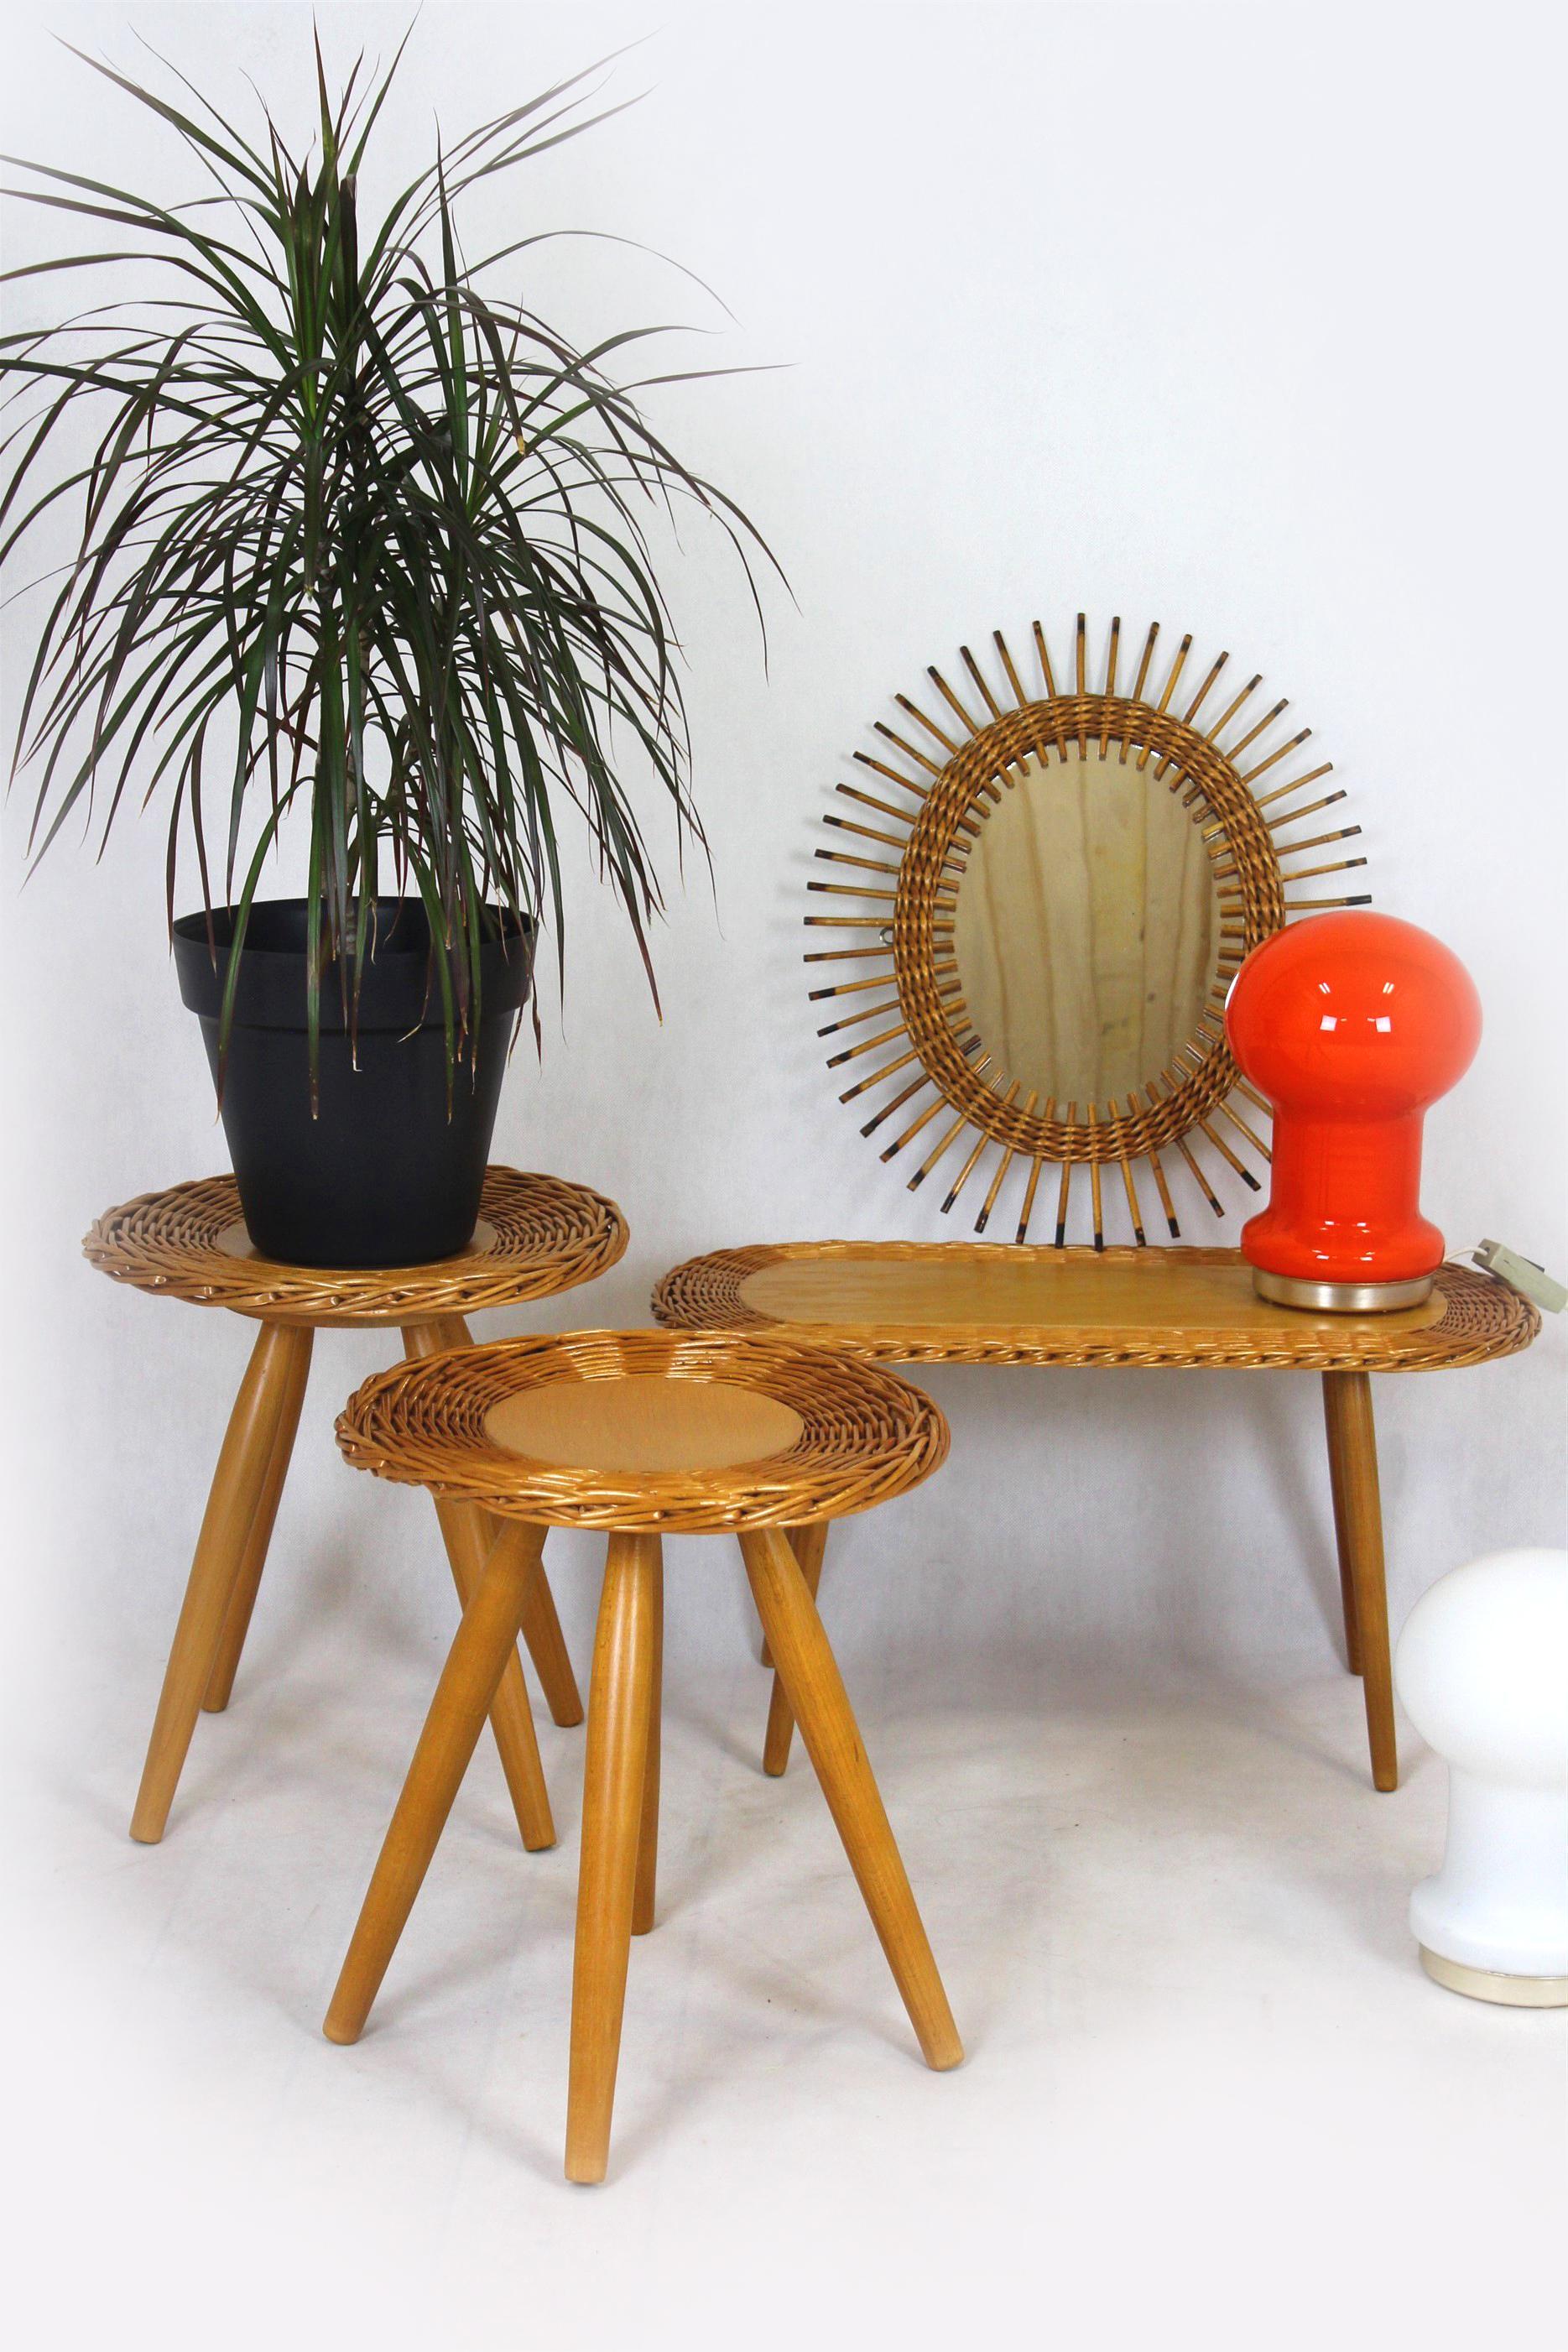 Czechoslovakian rattan stools/flower stands, designed by Jan Kalous for Úluv in the 1960s.
Preserved in very good condition.